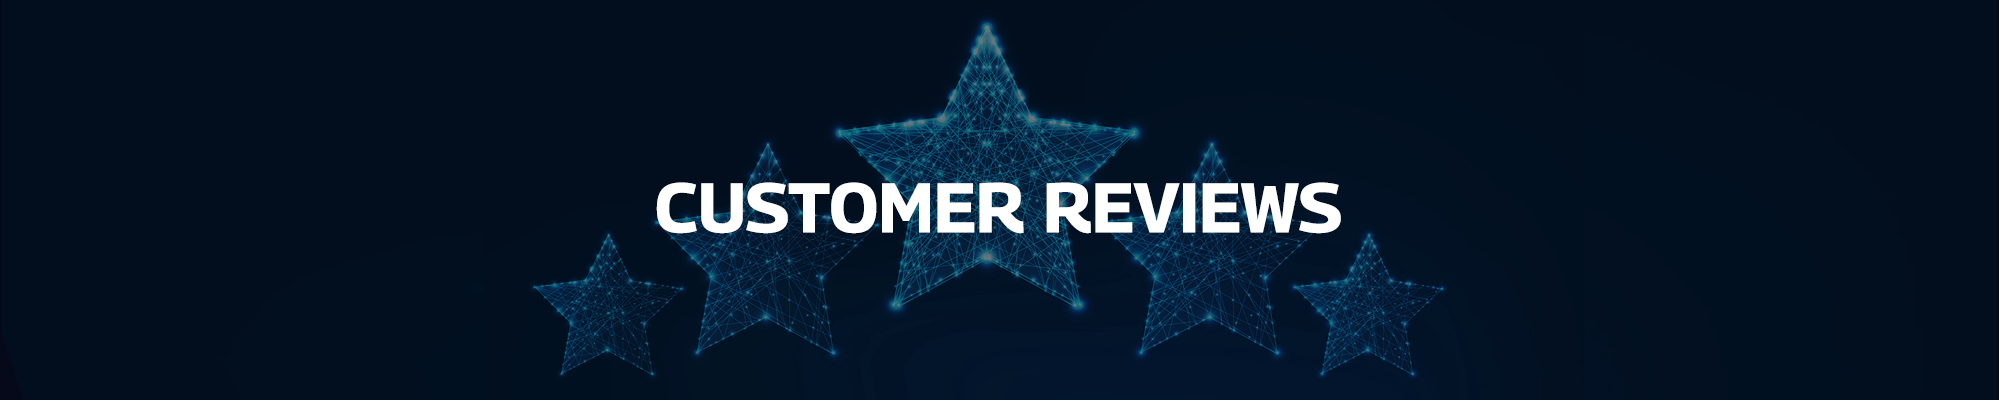 Customer reviews with star